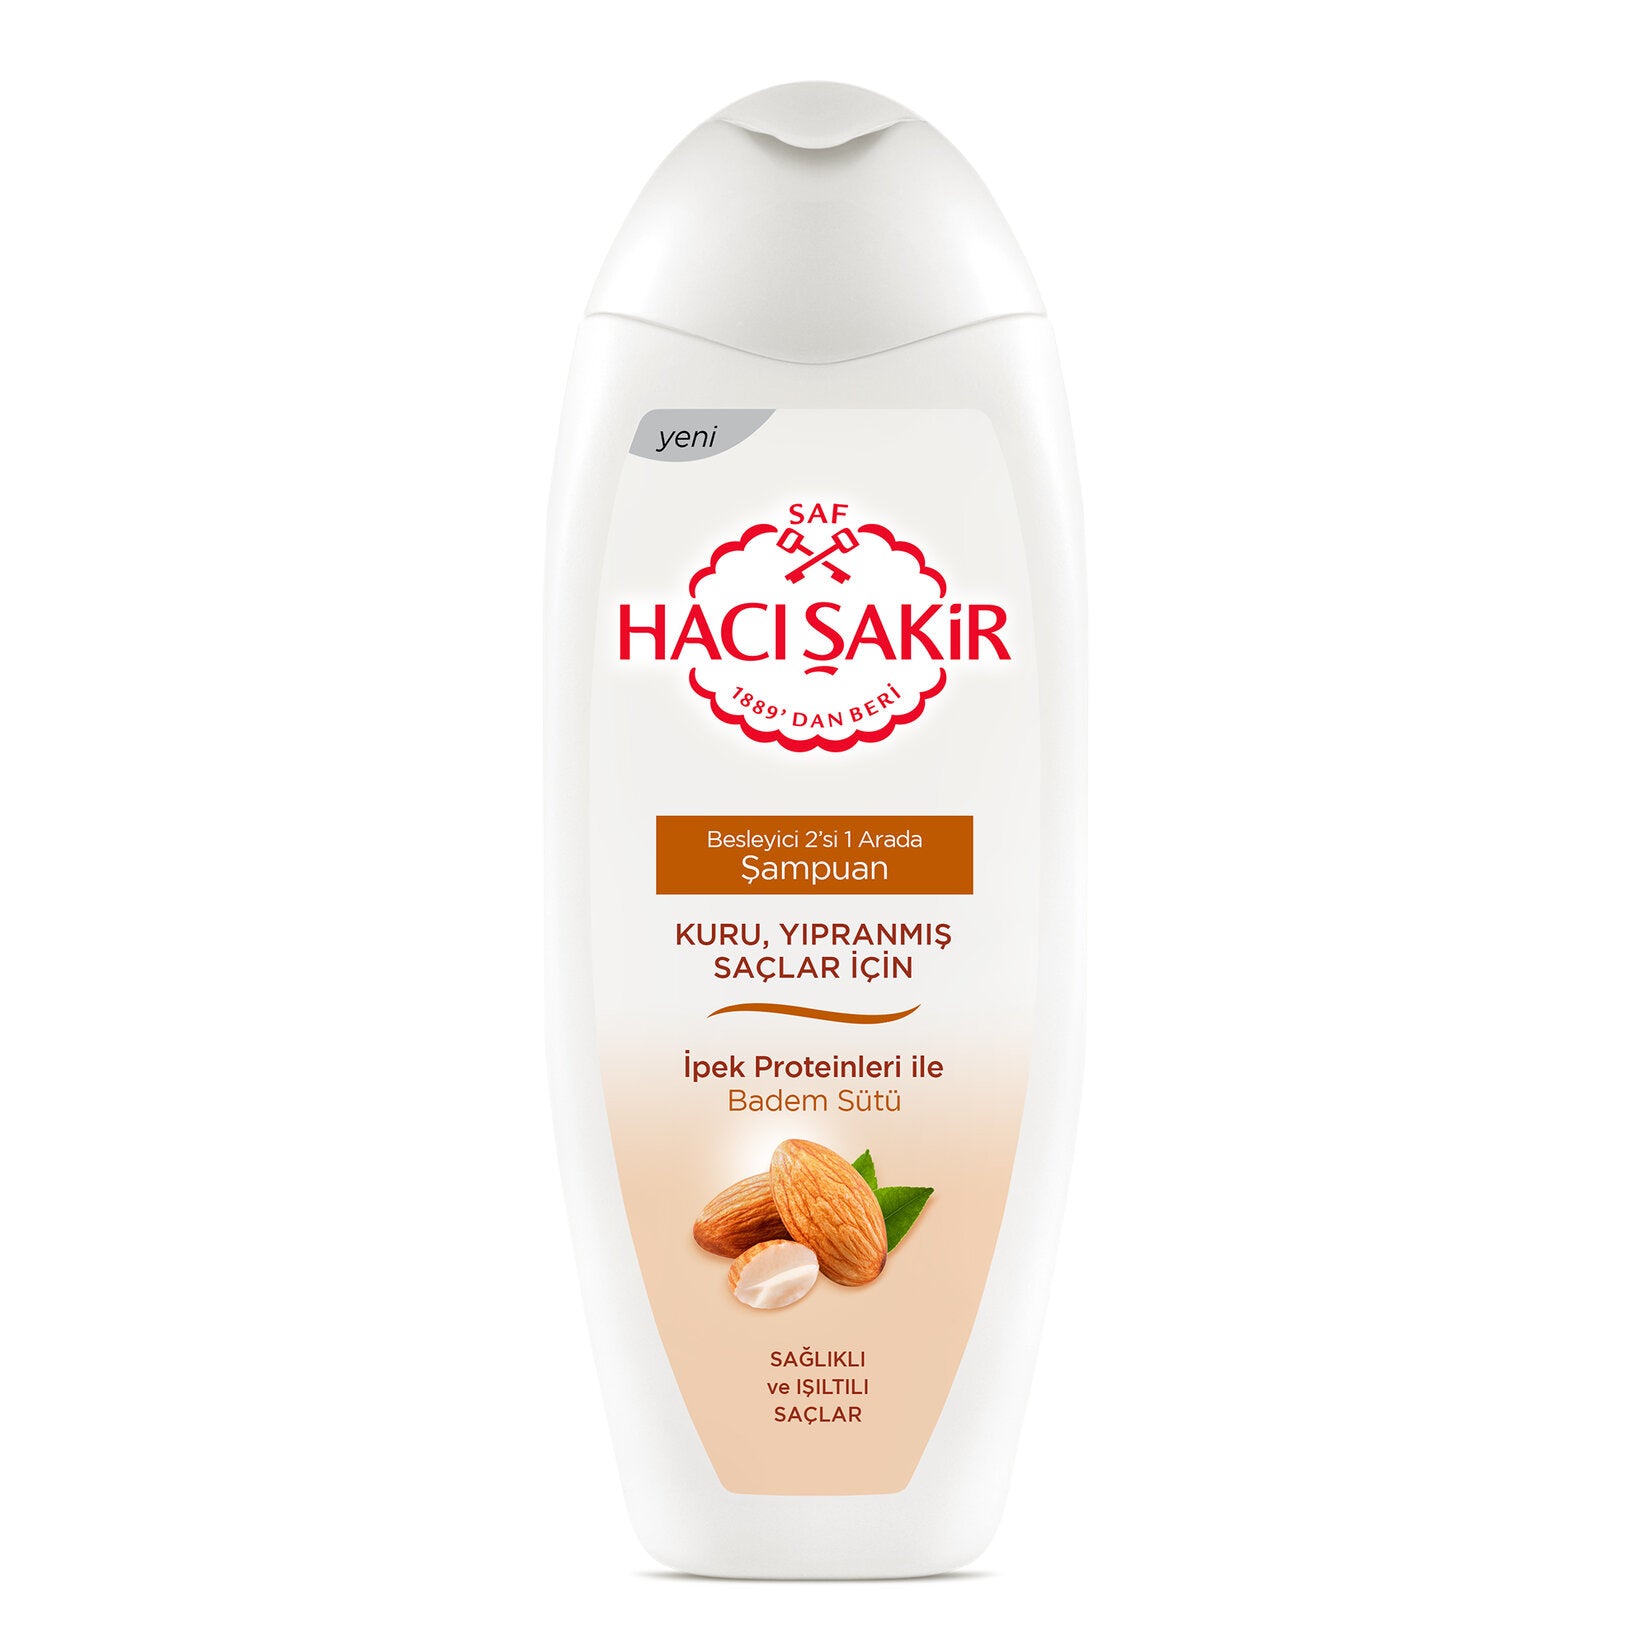 Shampoo with almond for dry hair 500 ml